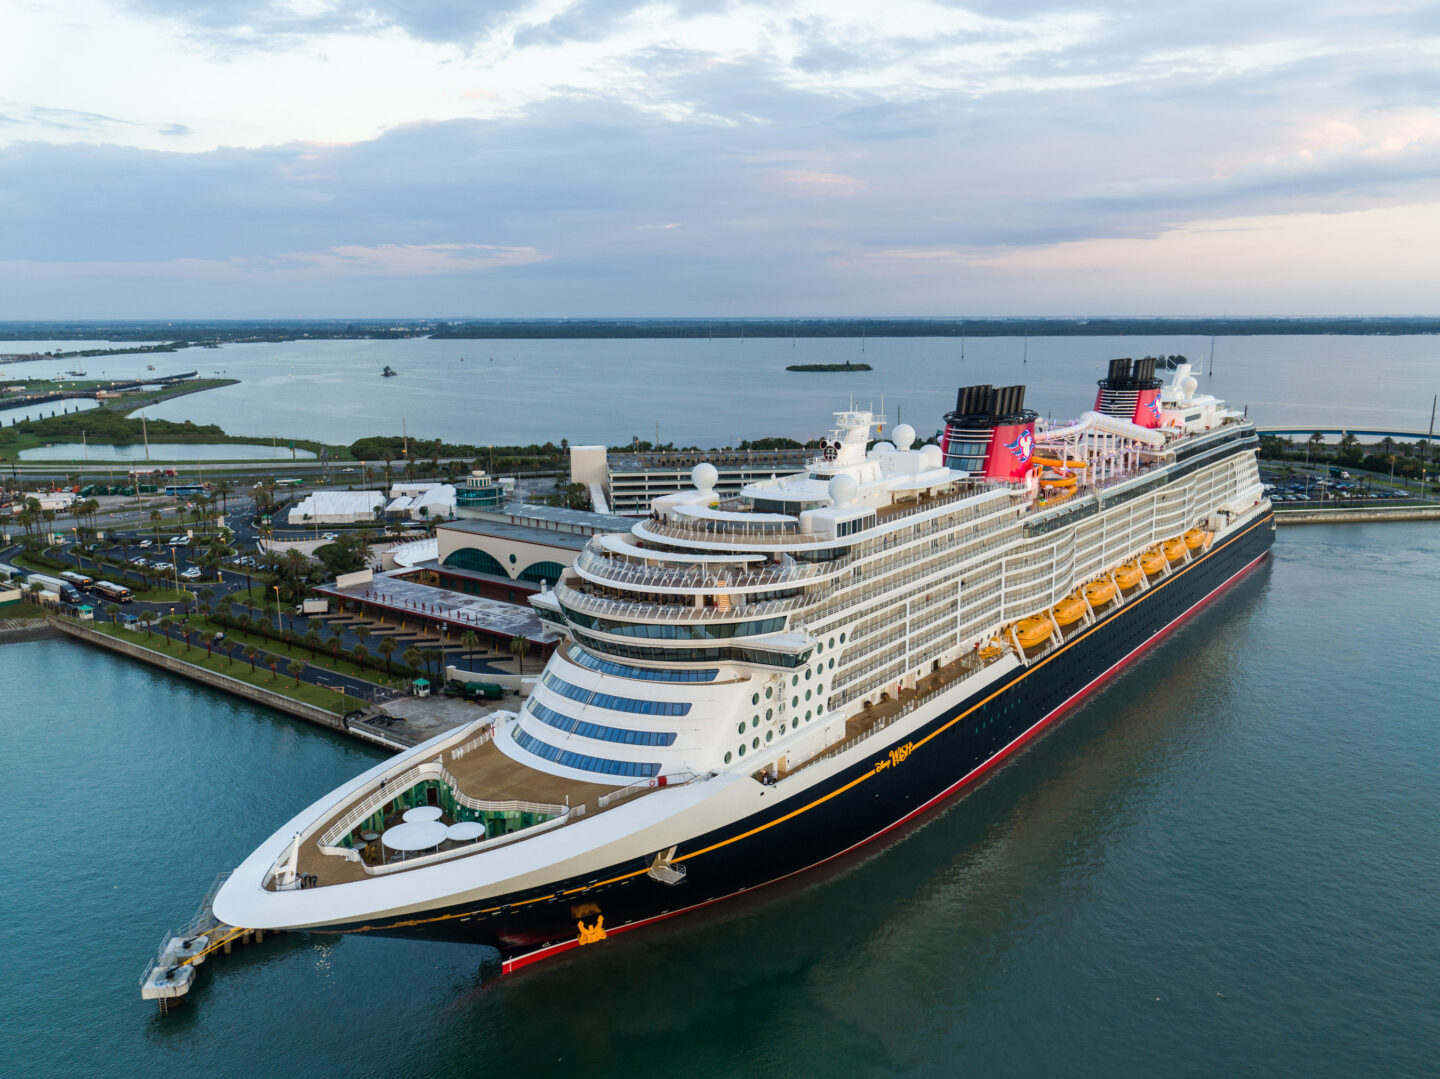 Best Disney Cruise Line Ship: Disney Wish from above